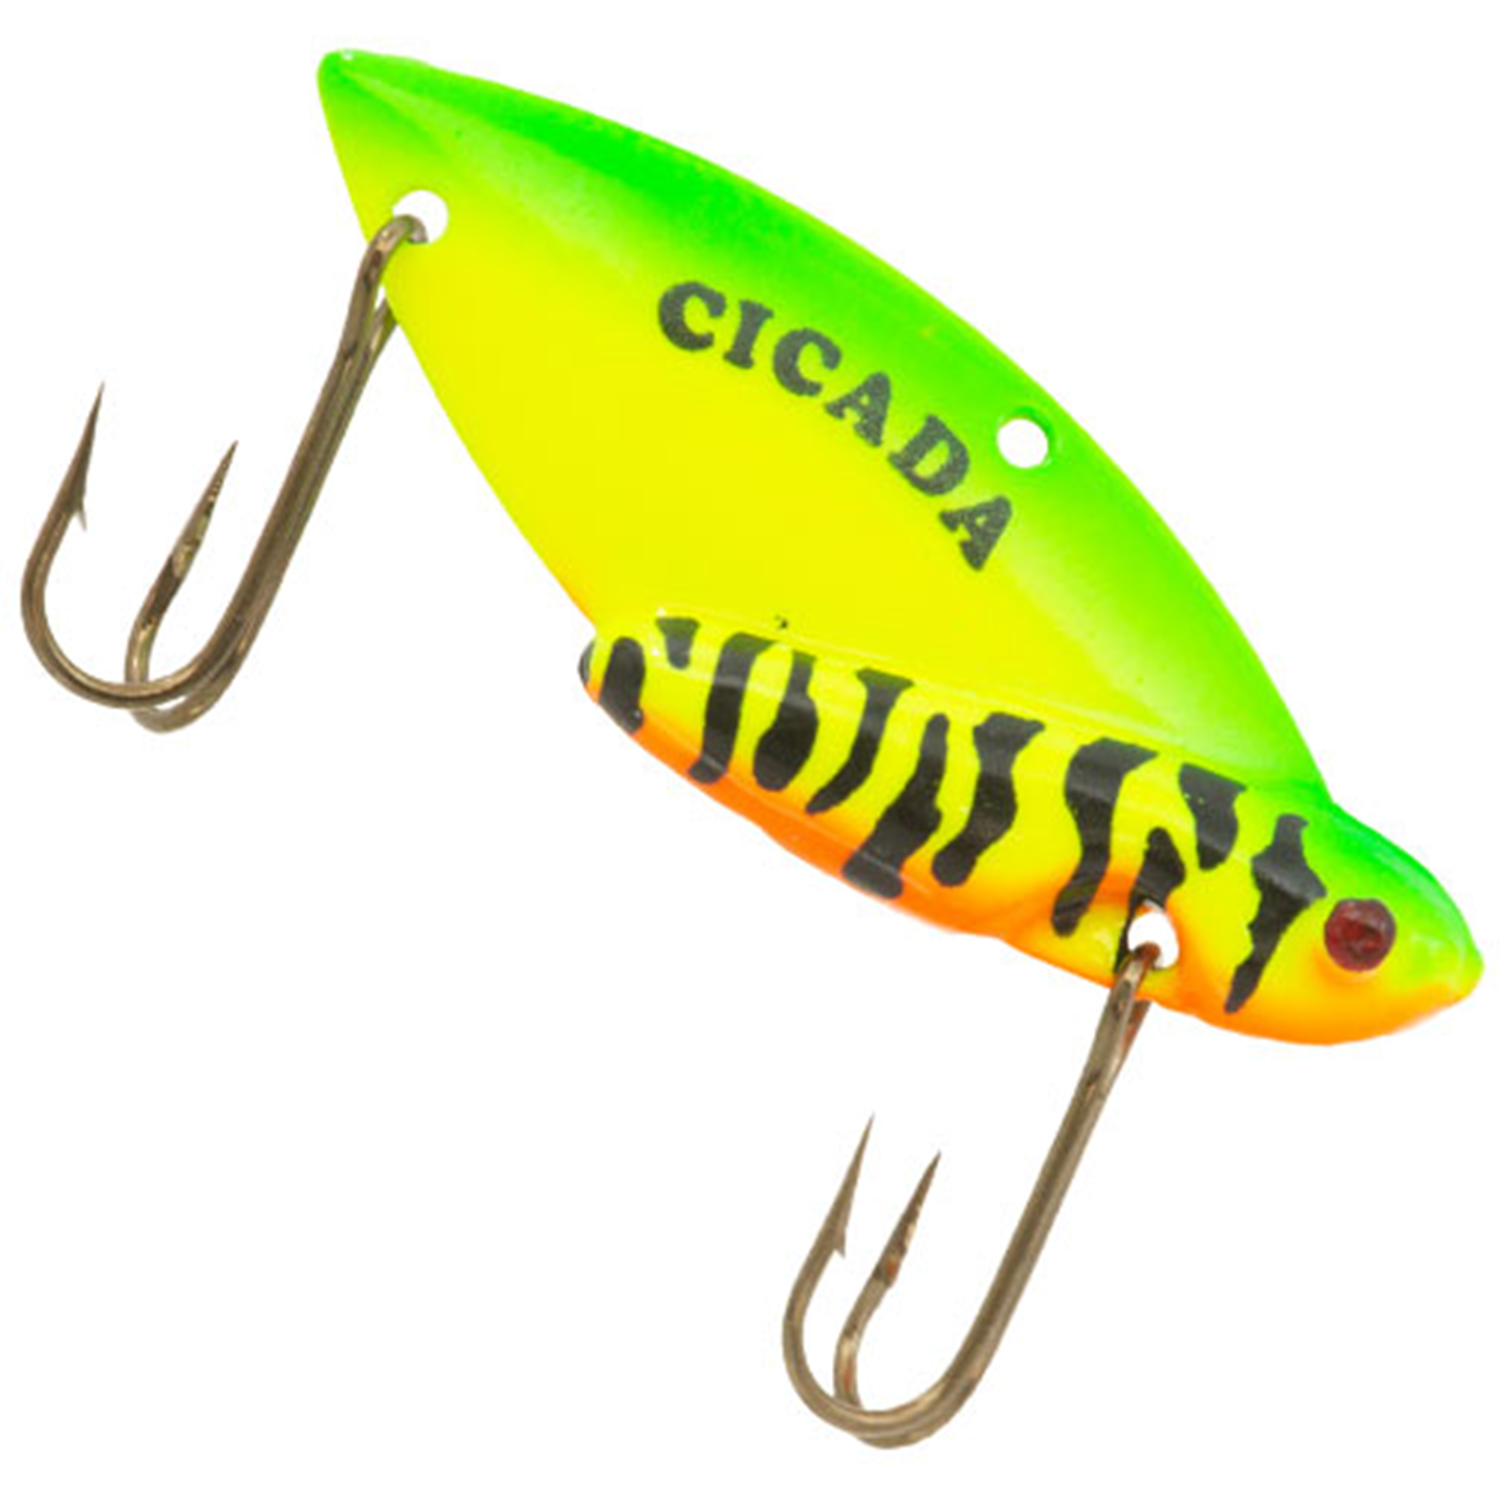 Reef Runner Lures - Acme Tackle Company